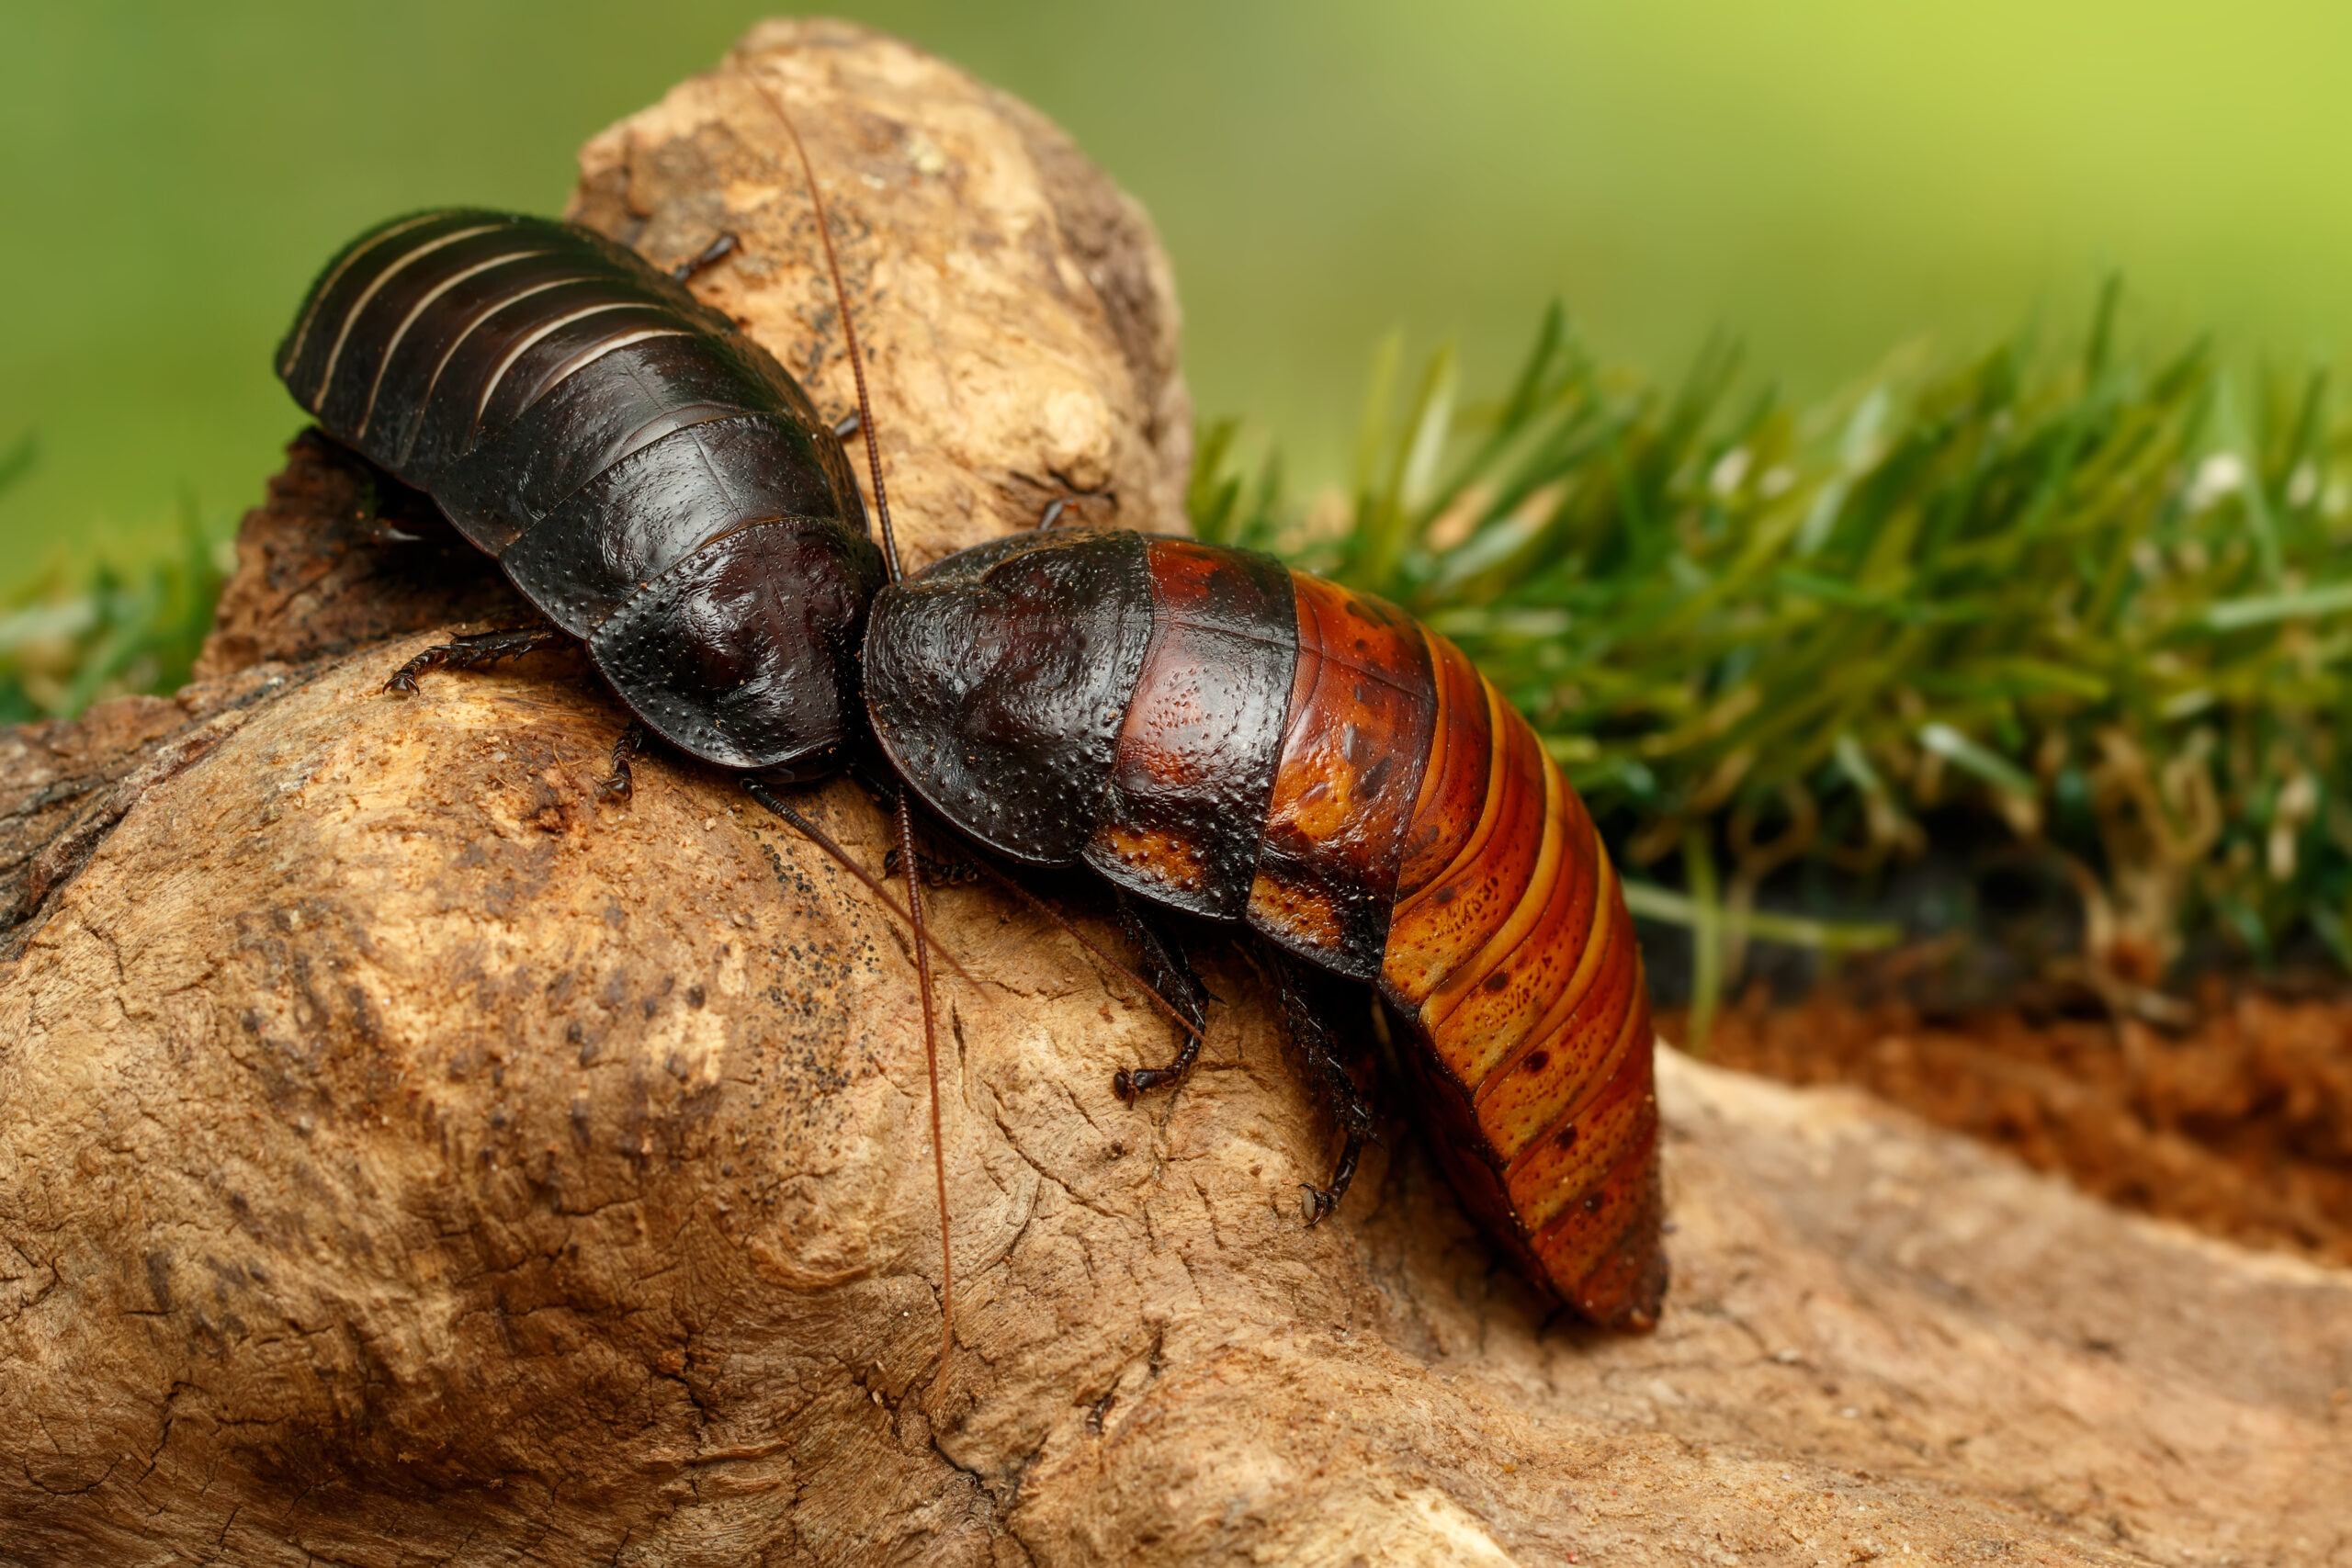 A close-up photo of two big Madagascar Hissing Cockroaches, scientifically known as Gromphadorhina portentosa. The cockroaches have dark brown exoskeletons with ridges and bumps, and their long antennae and distinctive horns on their thorax are visible in the image.